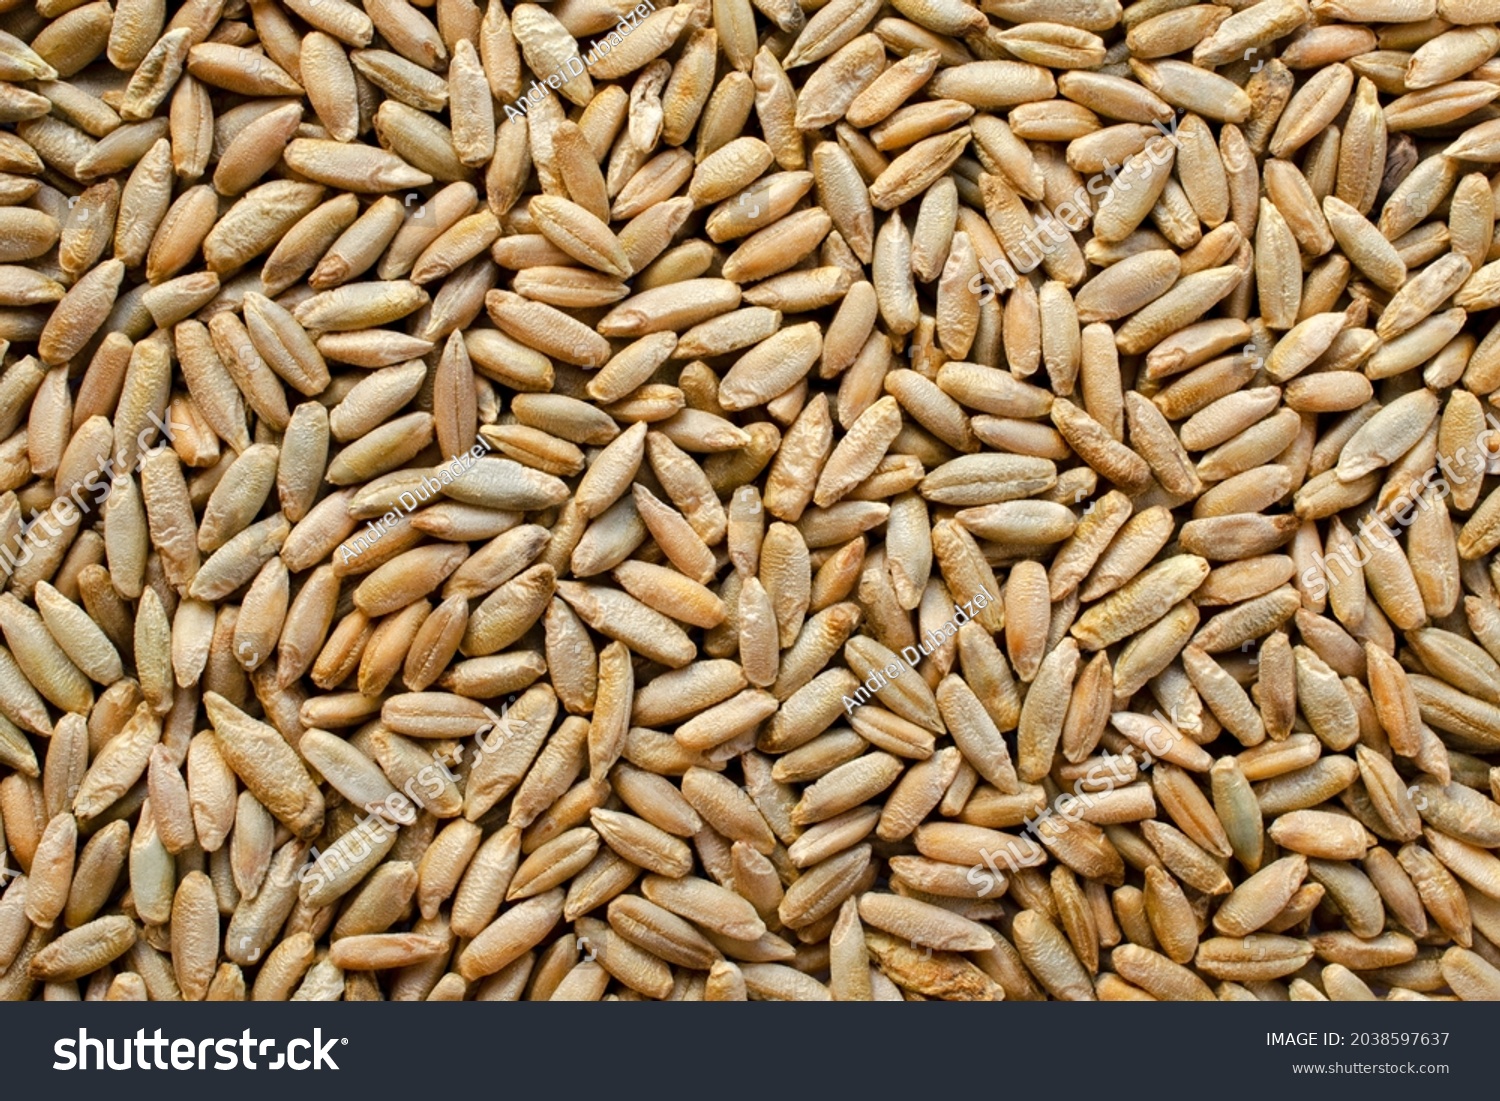 Background from dry grains of winter rye, top view. Rye grain texture. Winter rye seeds, top view, close-up. Rye seeds close-up, top view, texture. Background from grains of wheat. #2038597637